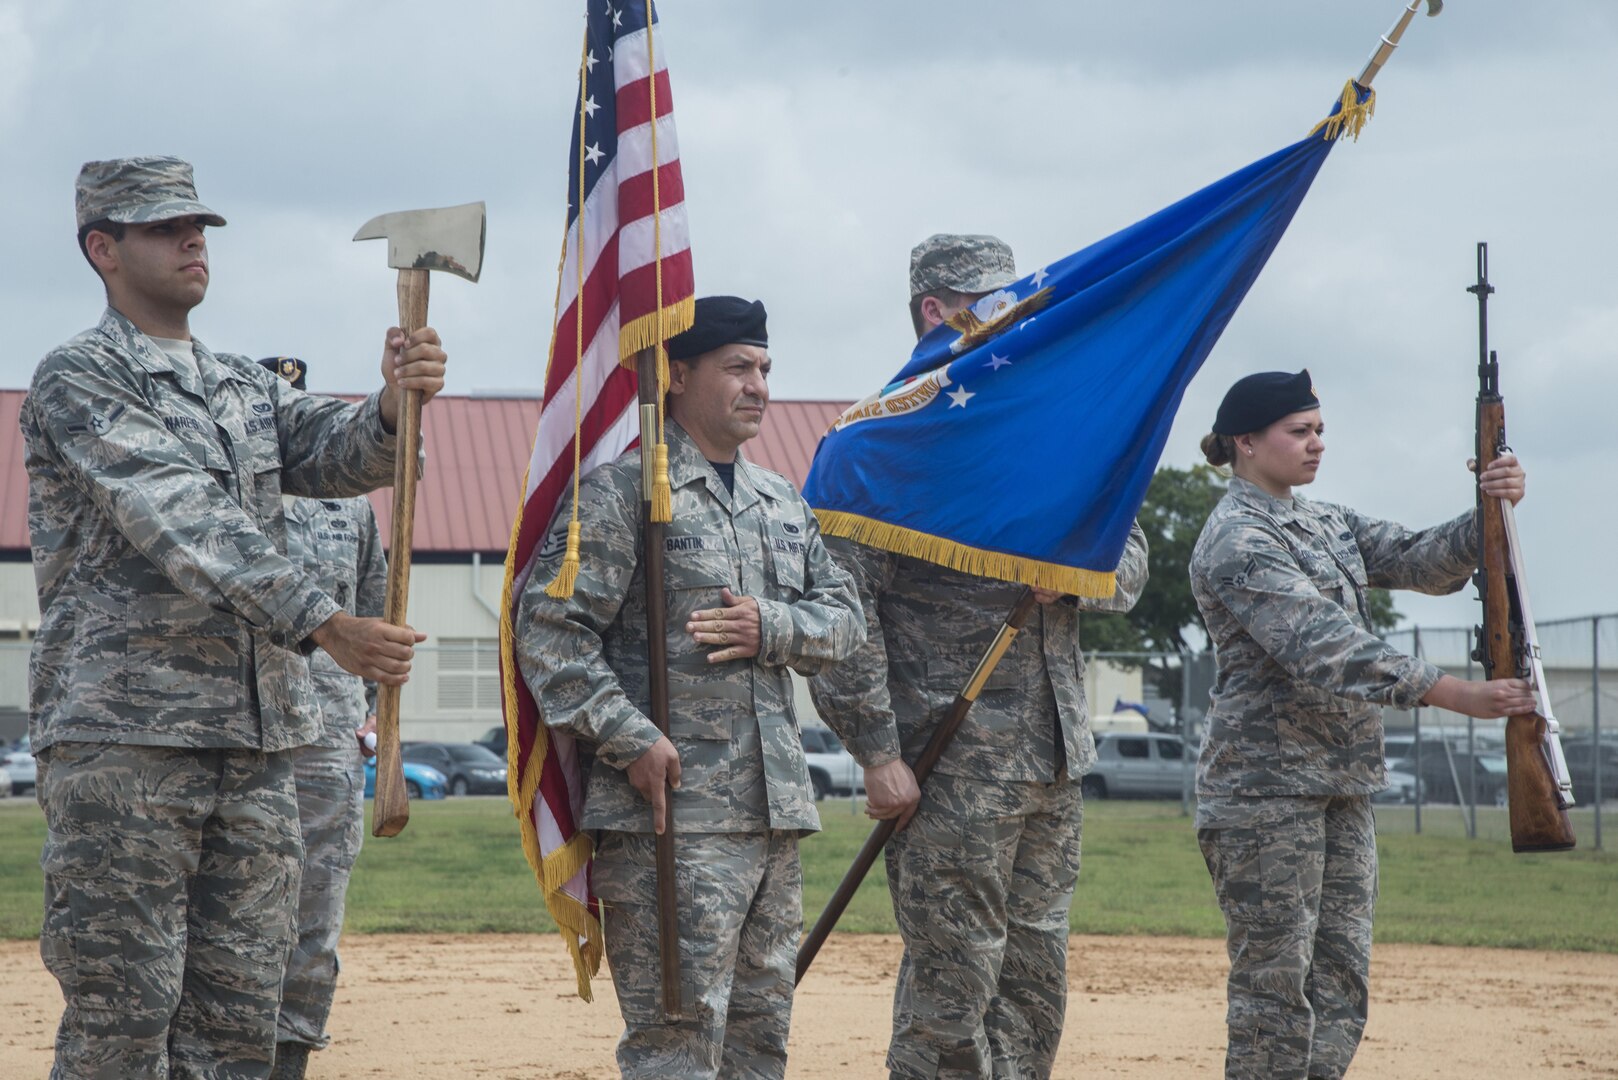 Airman Evan Nares, 502nd Civil Engineer Squadron firefighter, Staff Sgt. Fredric Bantin, 902nd Security Forces Squadron entry controller, Senior Airman Corey Lindner, 502nd CES firefighter, and Airman 1st Class Rose Dror, 902nd SFS entry controller, present the colors during an honor guard ceremony for beginning of the 2015 Joint Base San Antonio Battle of the Badges Sept. 11, 2015, at JBSA-Randolph. Battle of the Badges takes place each year to build camaraderie, espirit de corps and cohesion among JBSA first responders through various competitive challenges based on their daily mission readiness requirements.